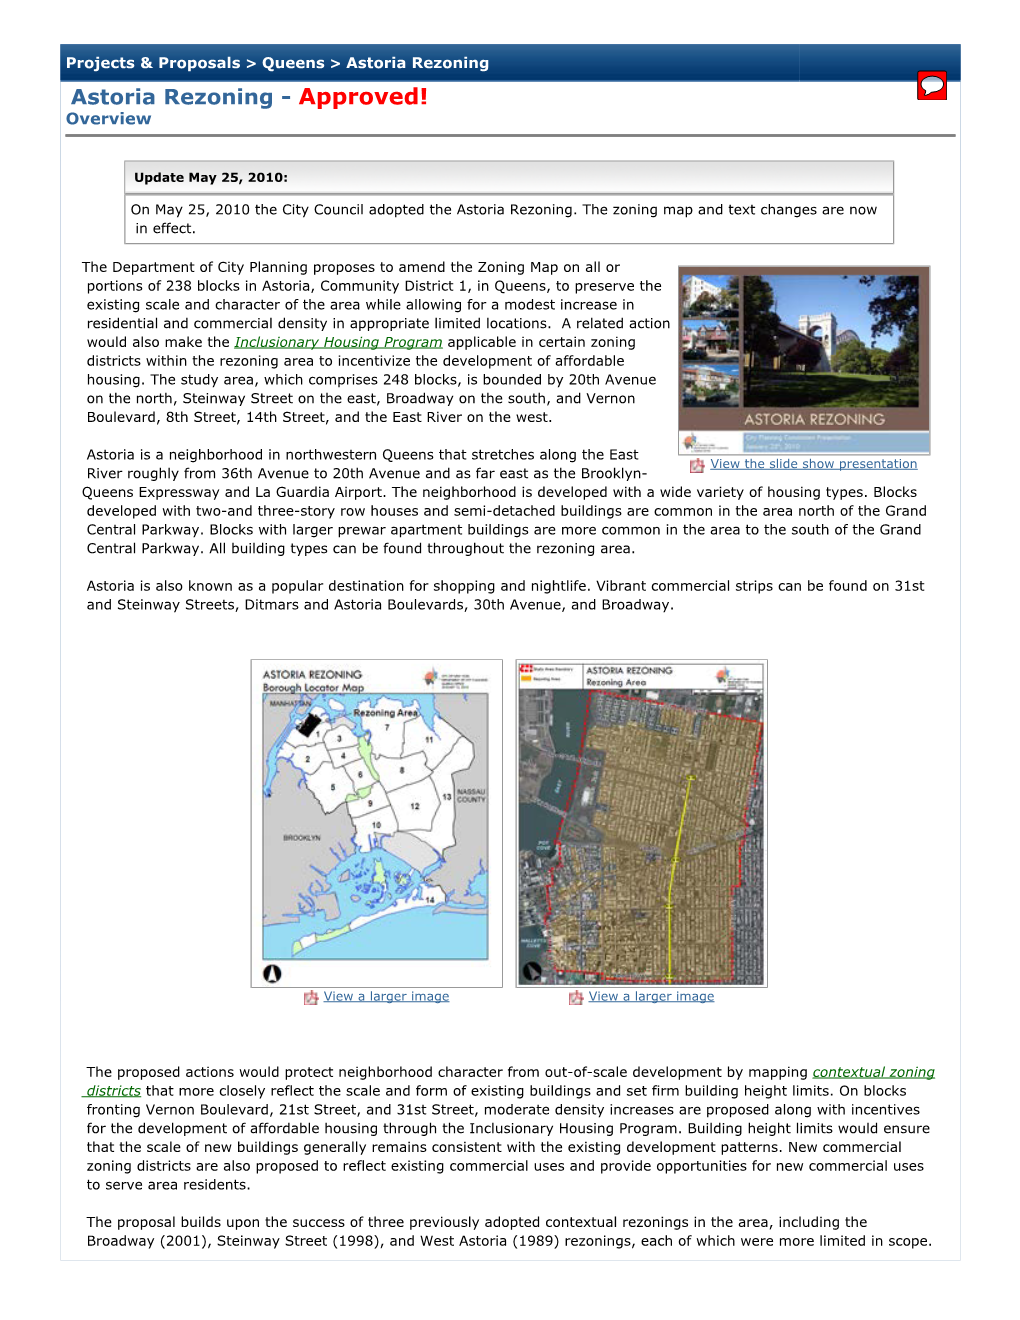 Astoria Rezoning Astoria Rezoning - Approved! Overview